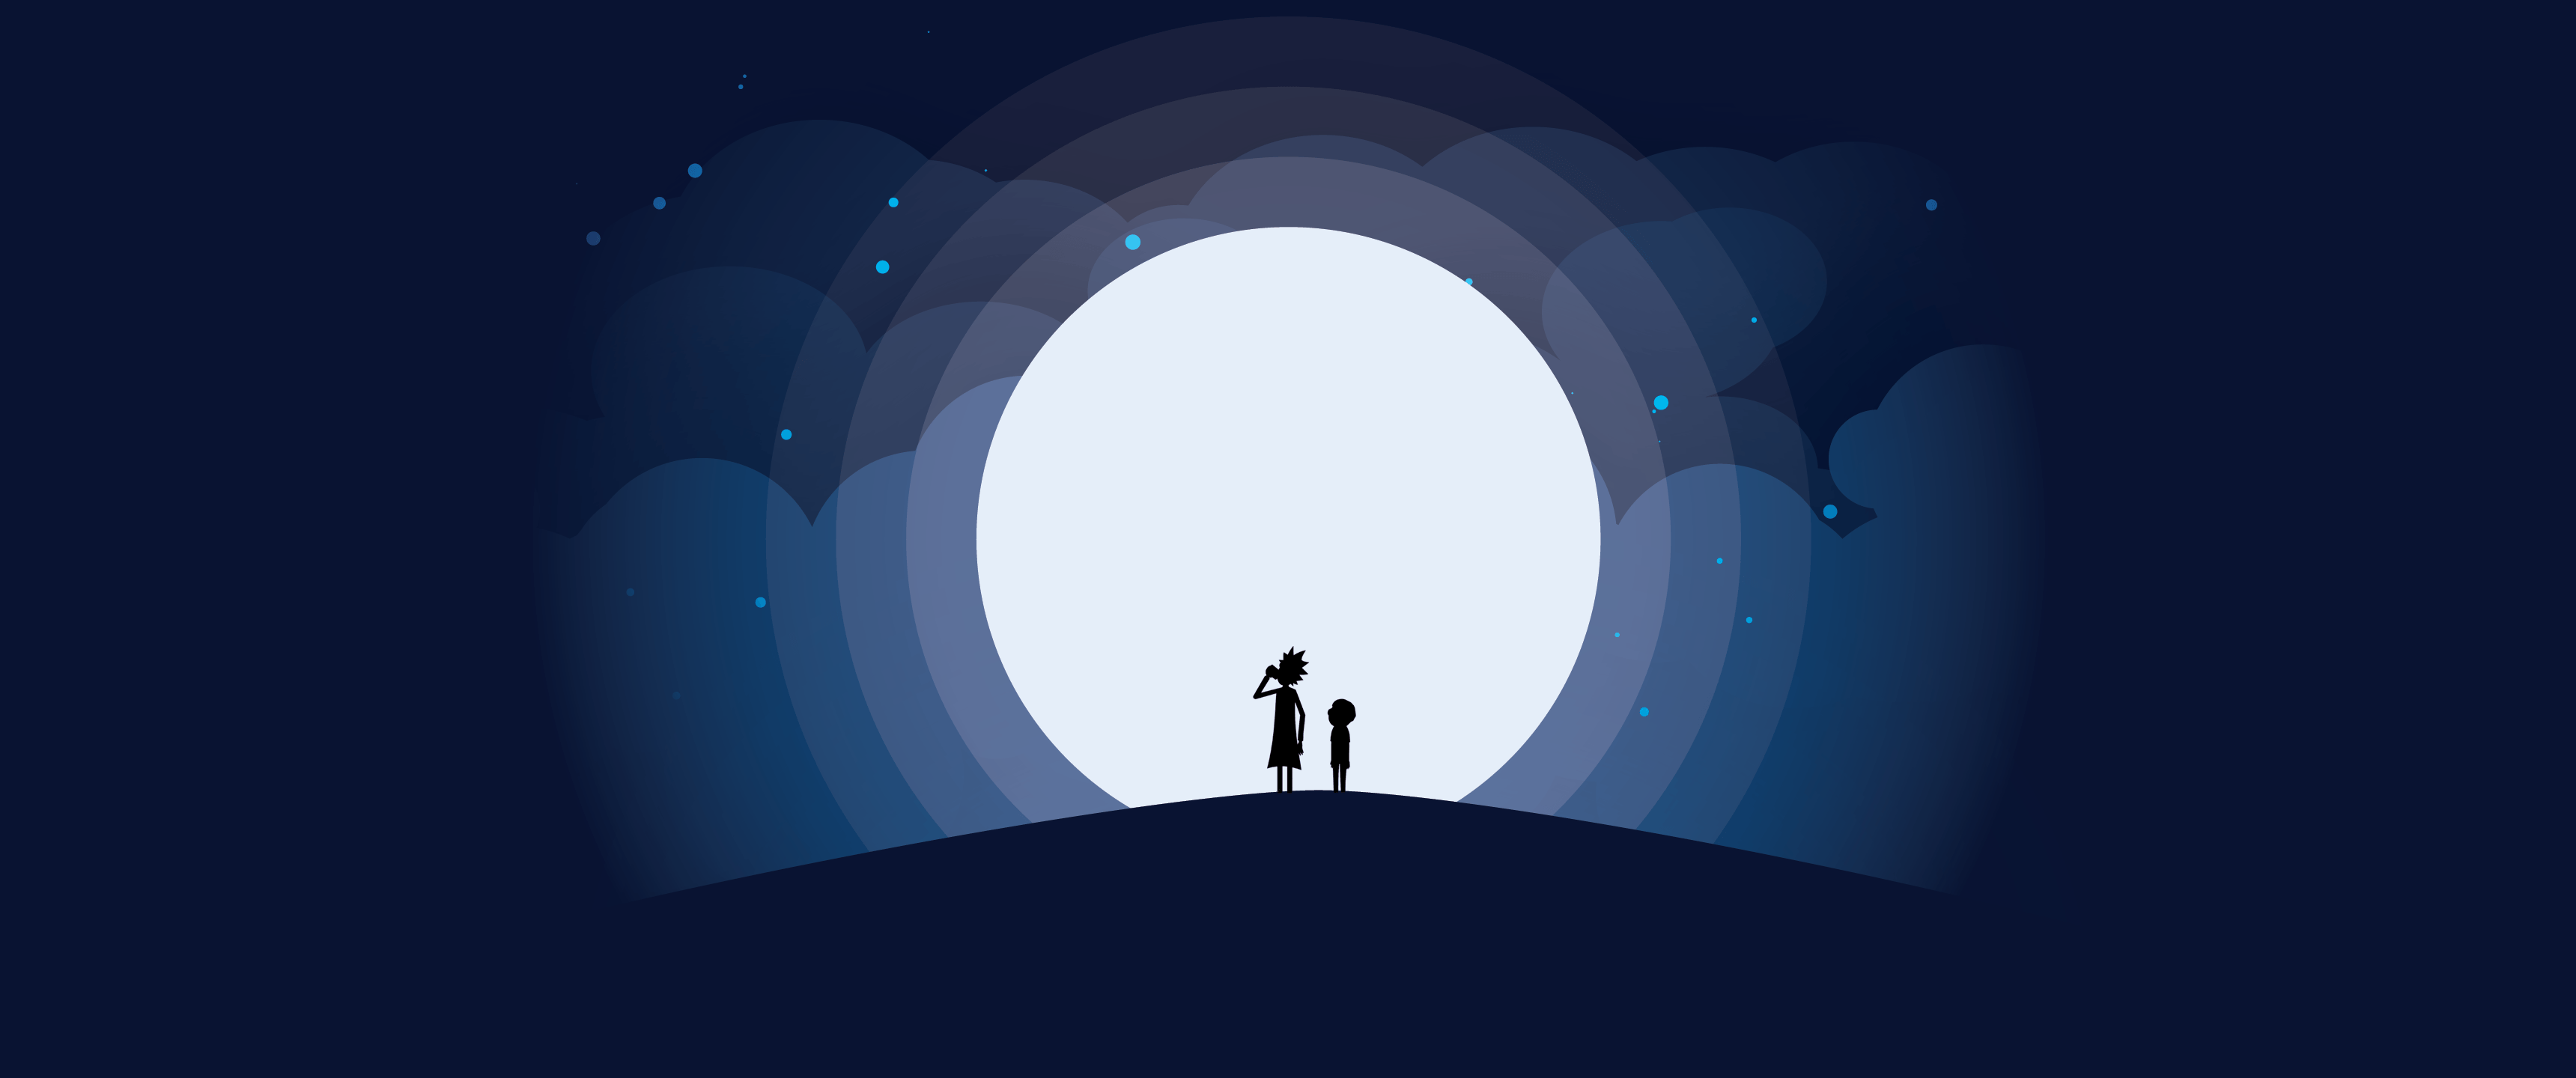 Rick And Morty Wallpaper And Morty Wallpaper Minimalist